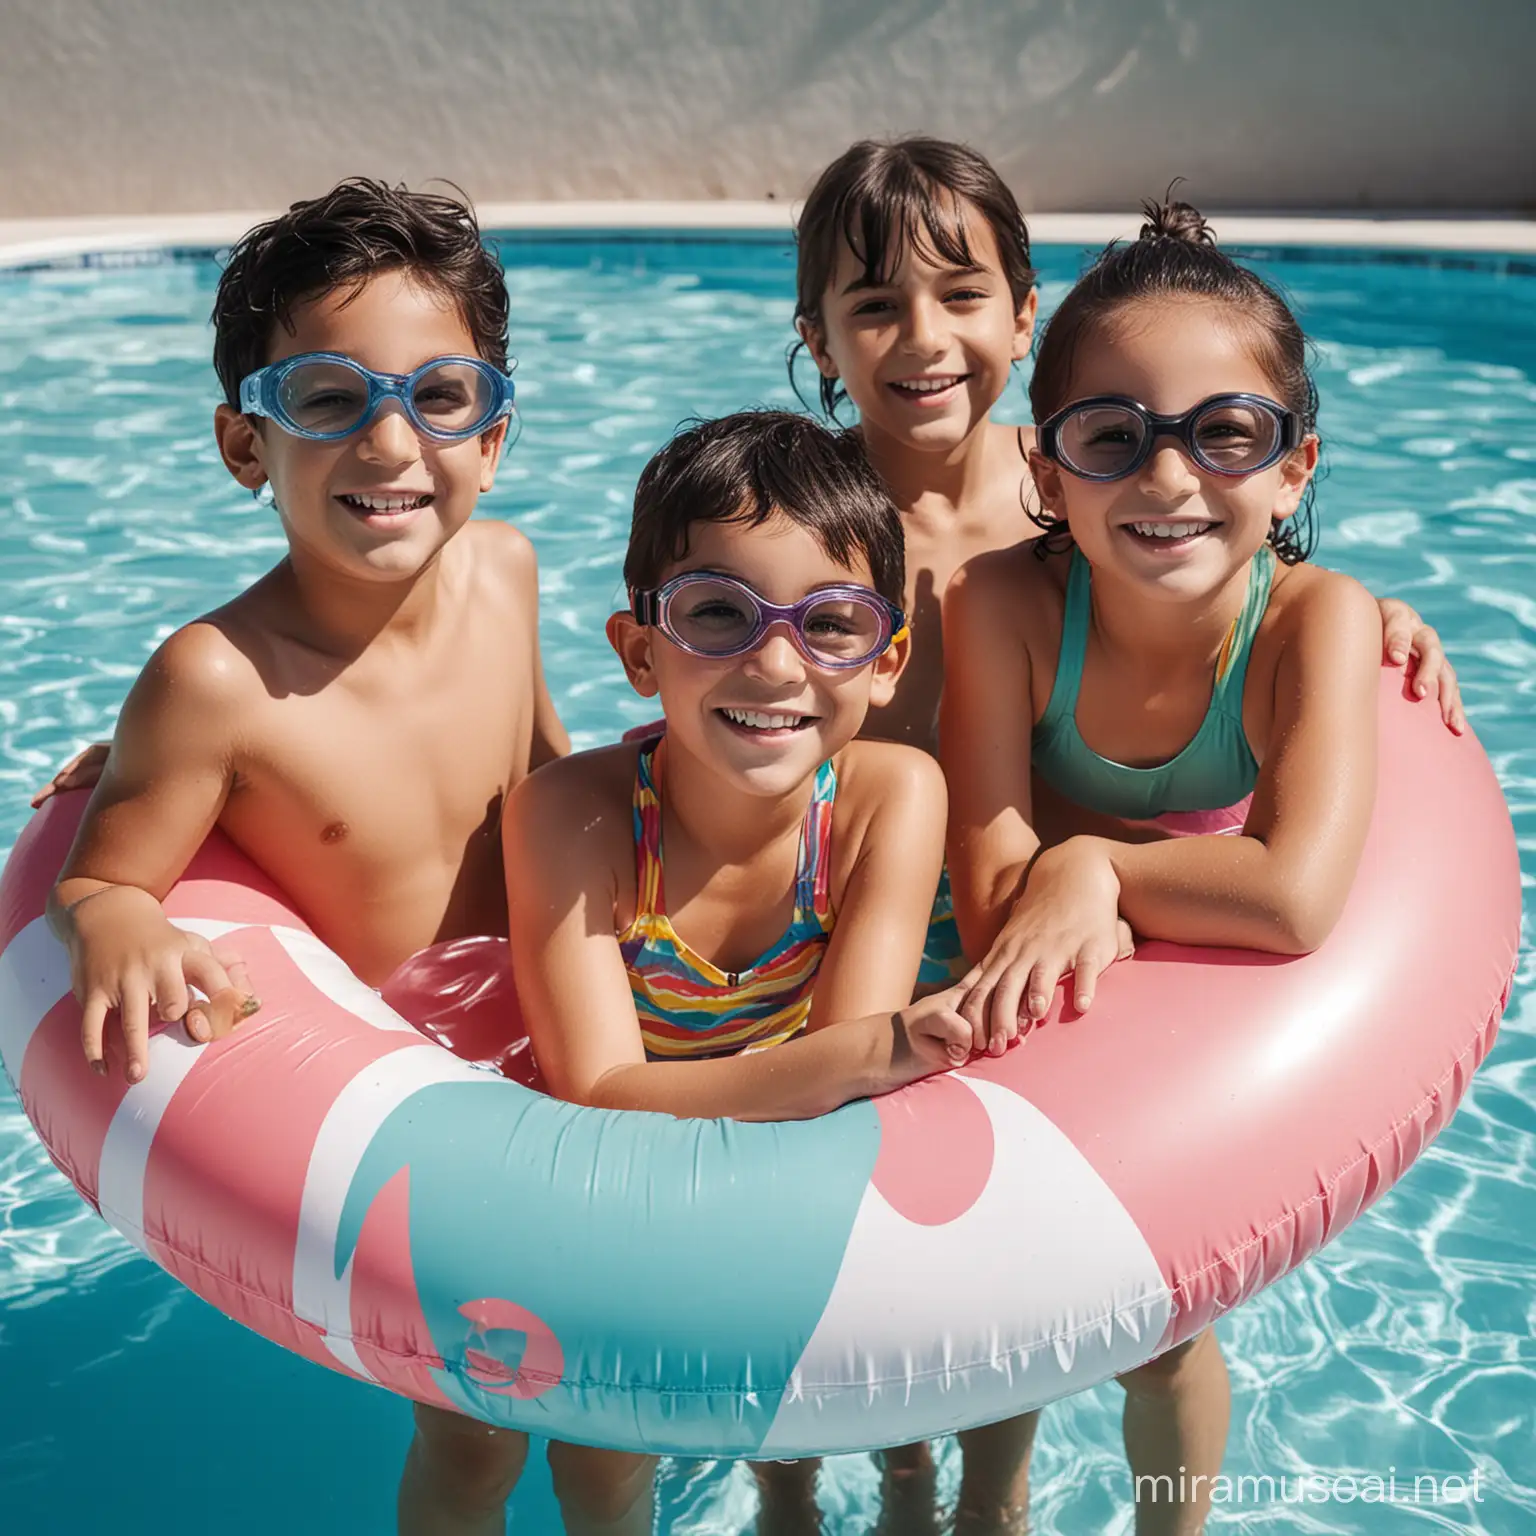 3 kids with black hair posing on camera, dressed in swimming shoot, swimming goggles, inflatable ring, smiling